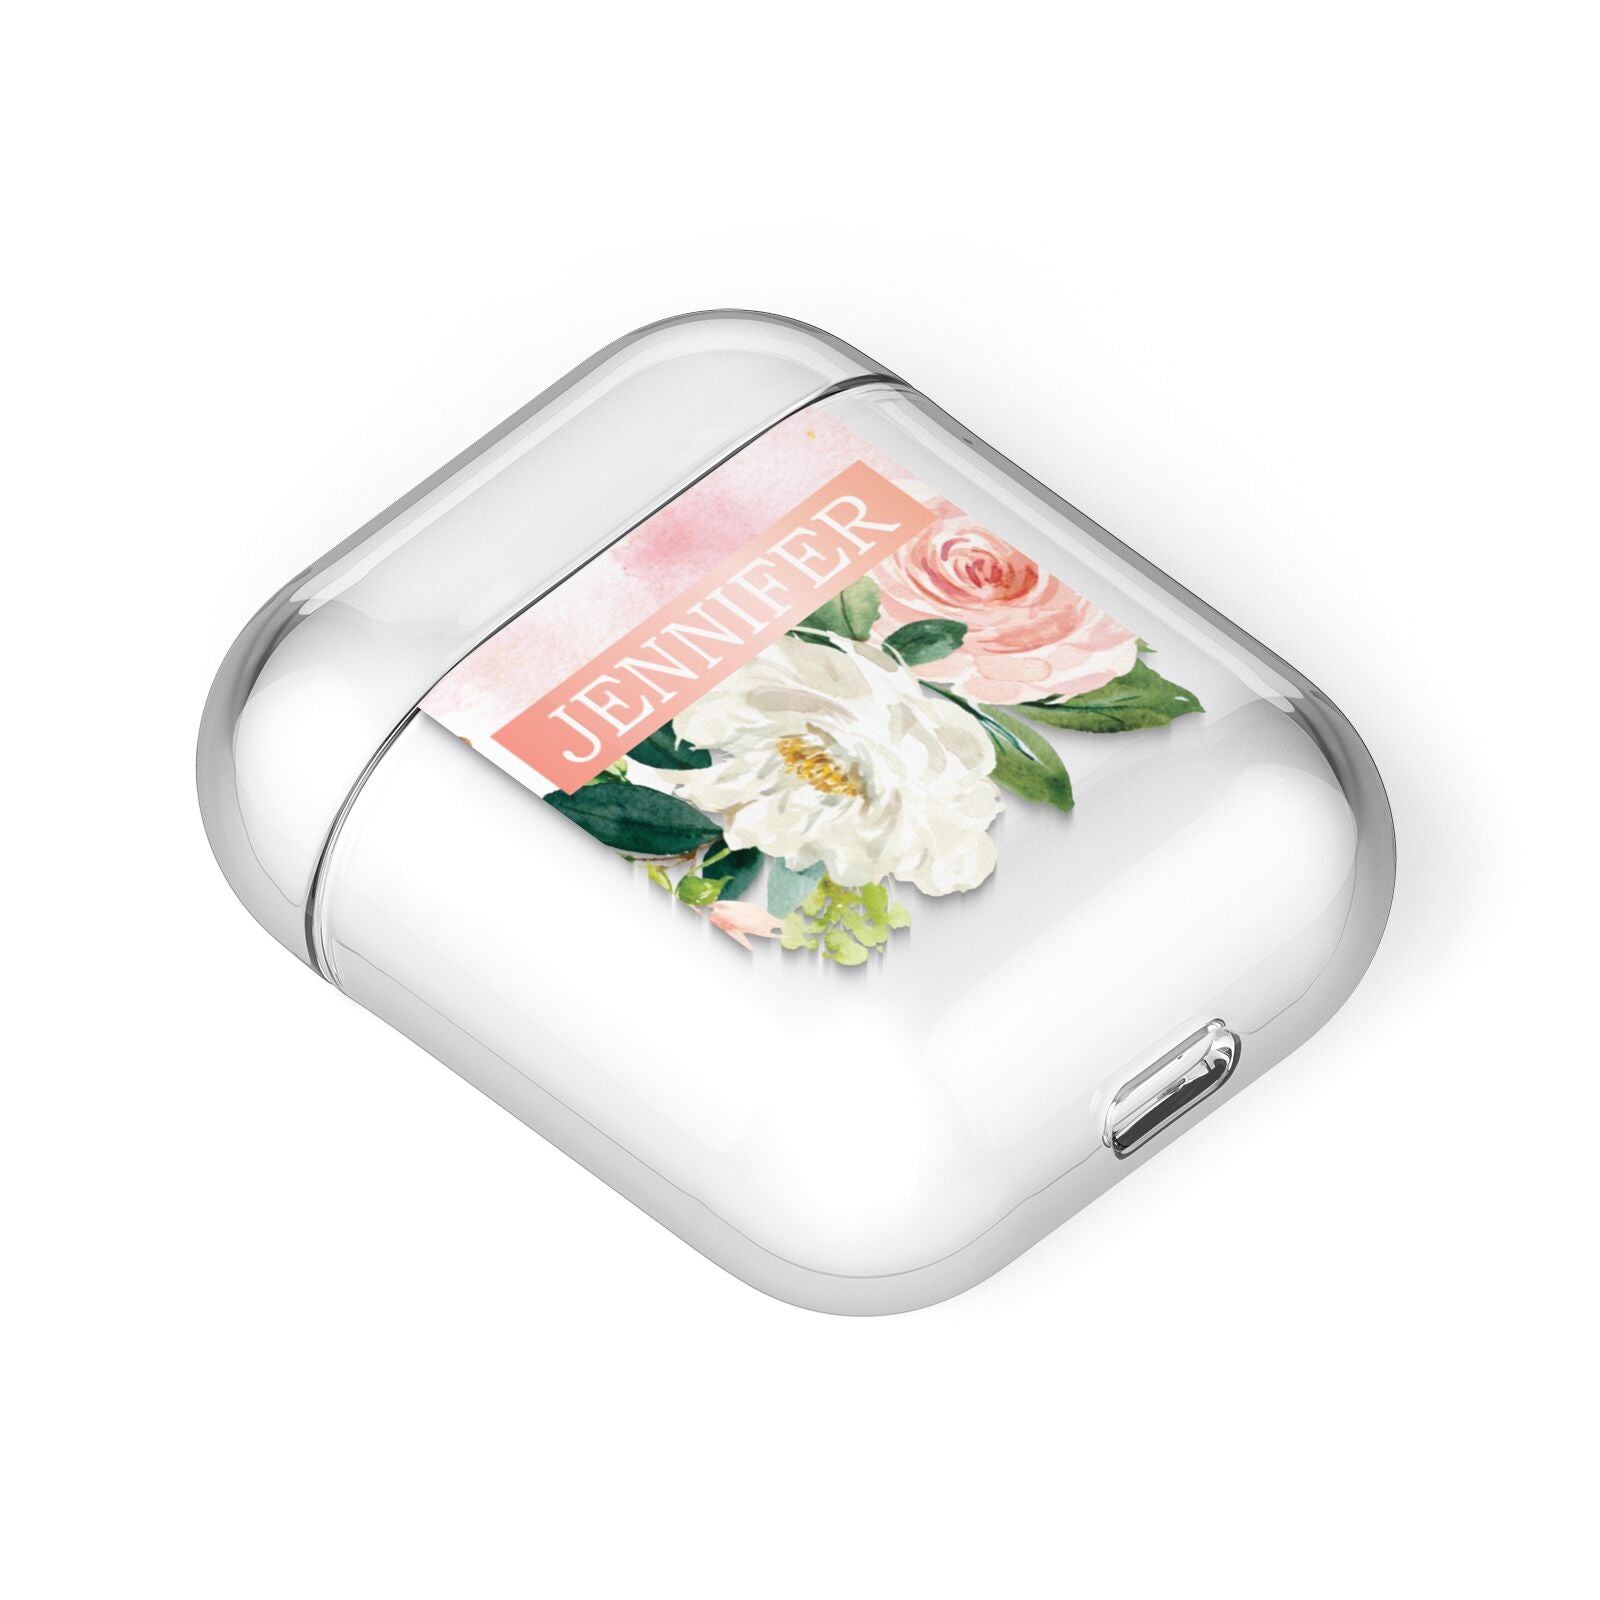 Blush Pink Personalised Name Floral AirPods Case Laid Flat